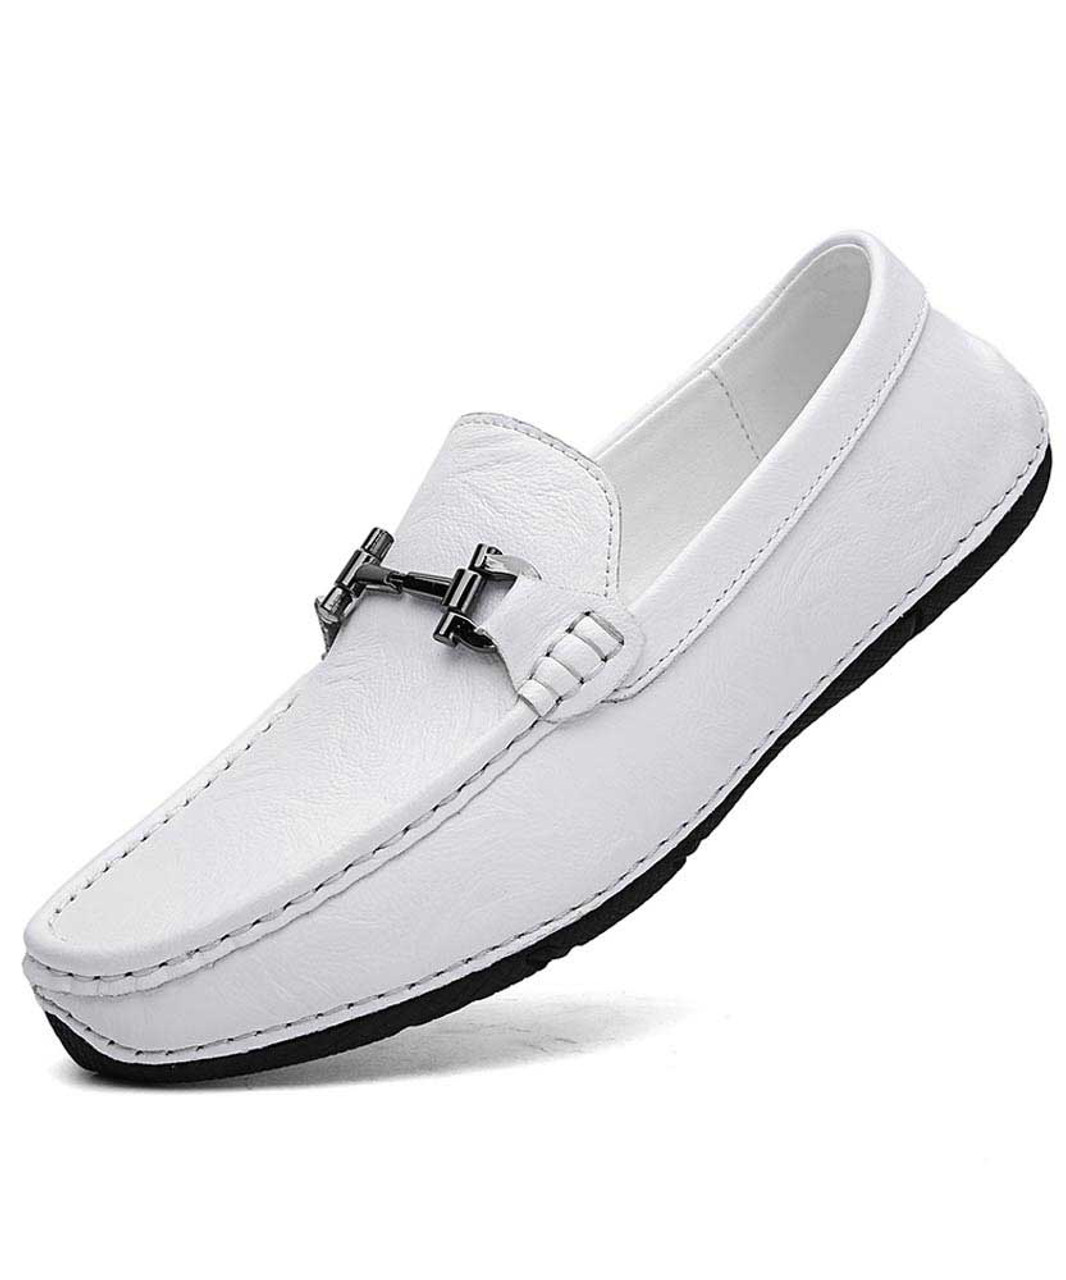 White metal buckle leather slip on loafer | Mens shoe loafers online 1856MS